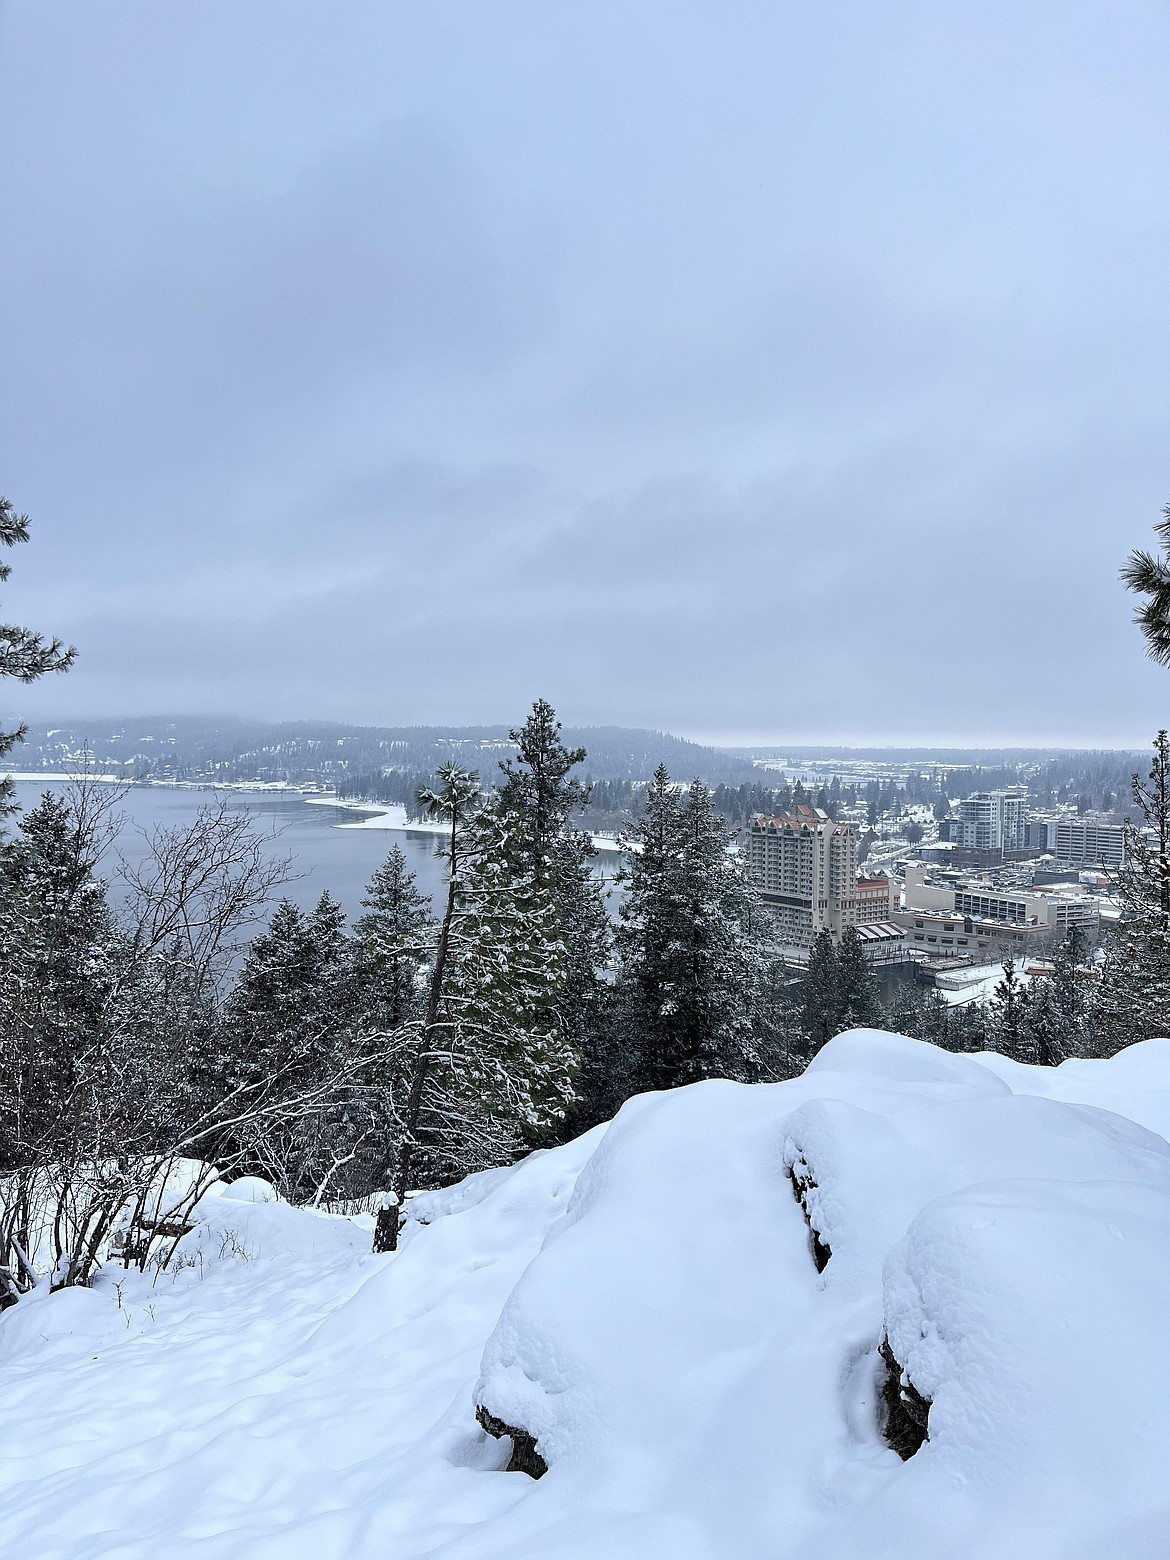 The Coeur d'Alene Resort and lake from Tubbs Hill. (photo by Travis Smith)